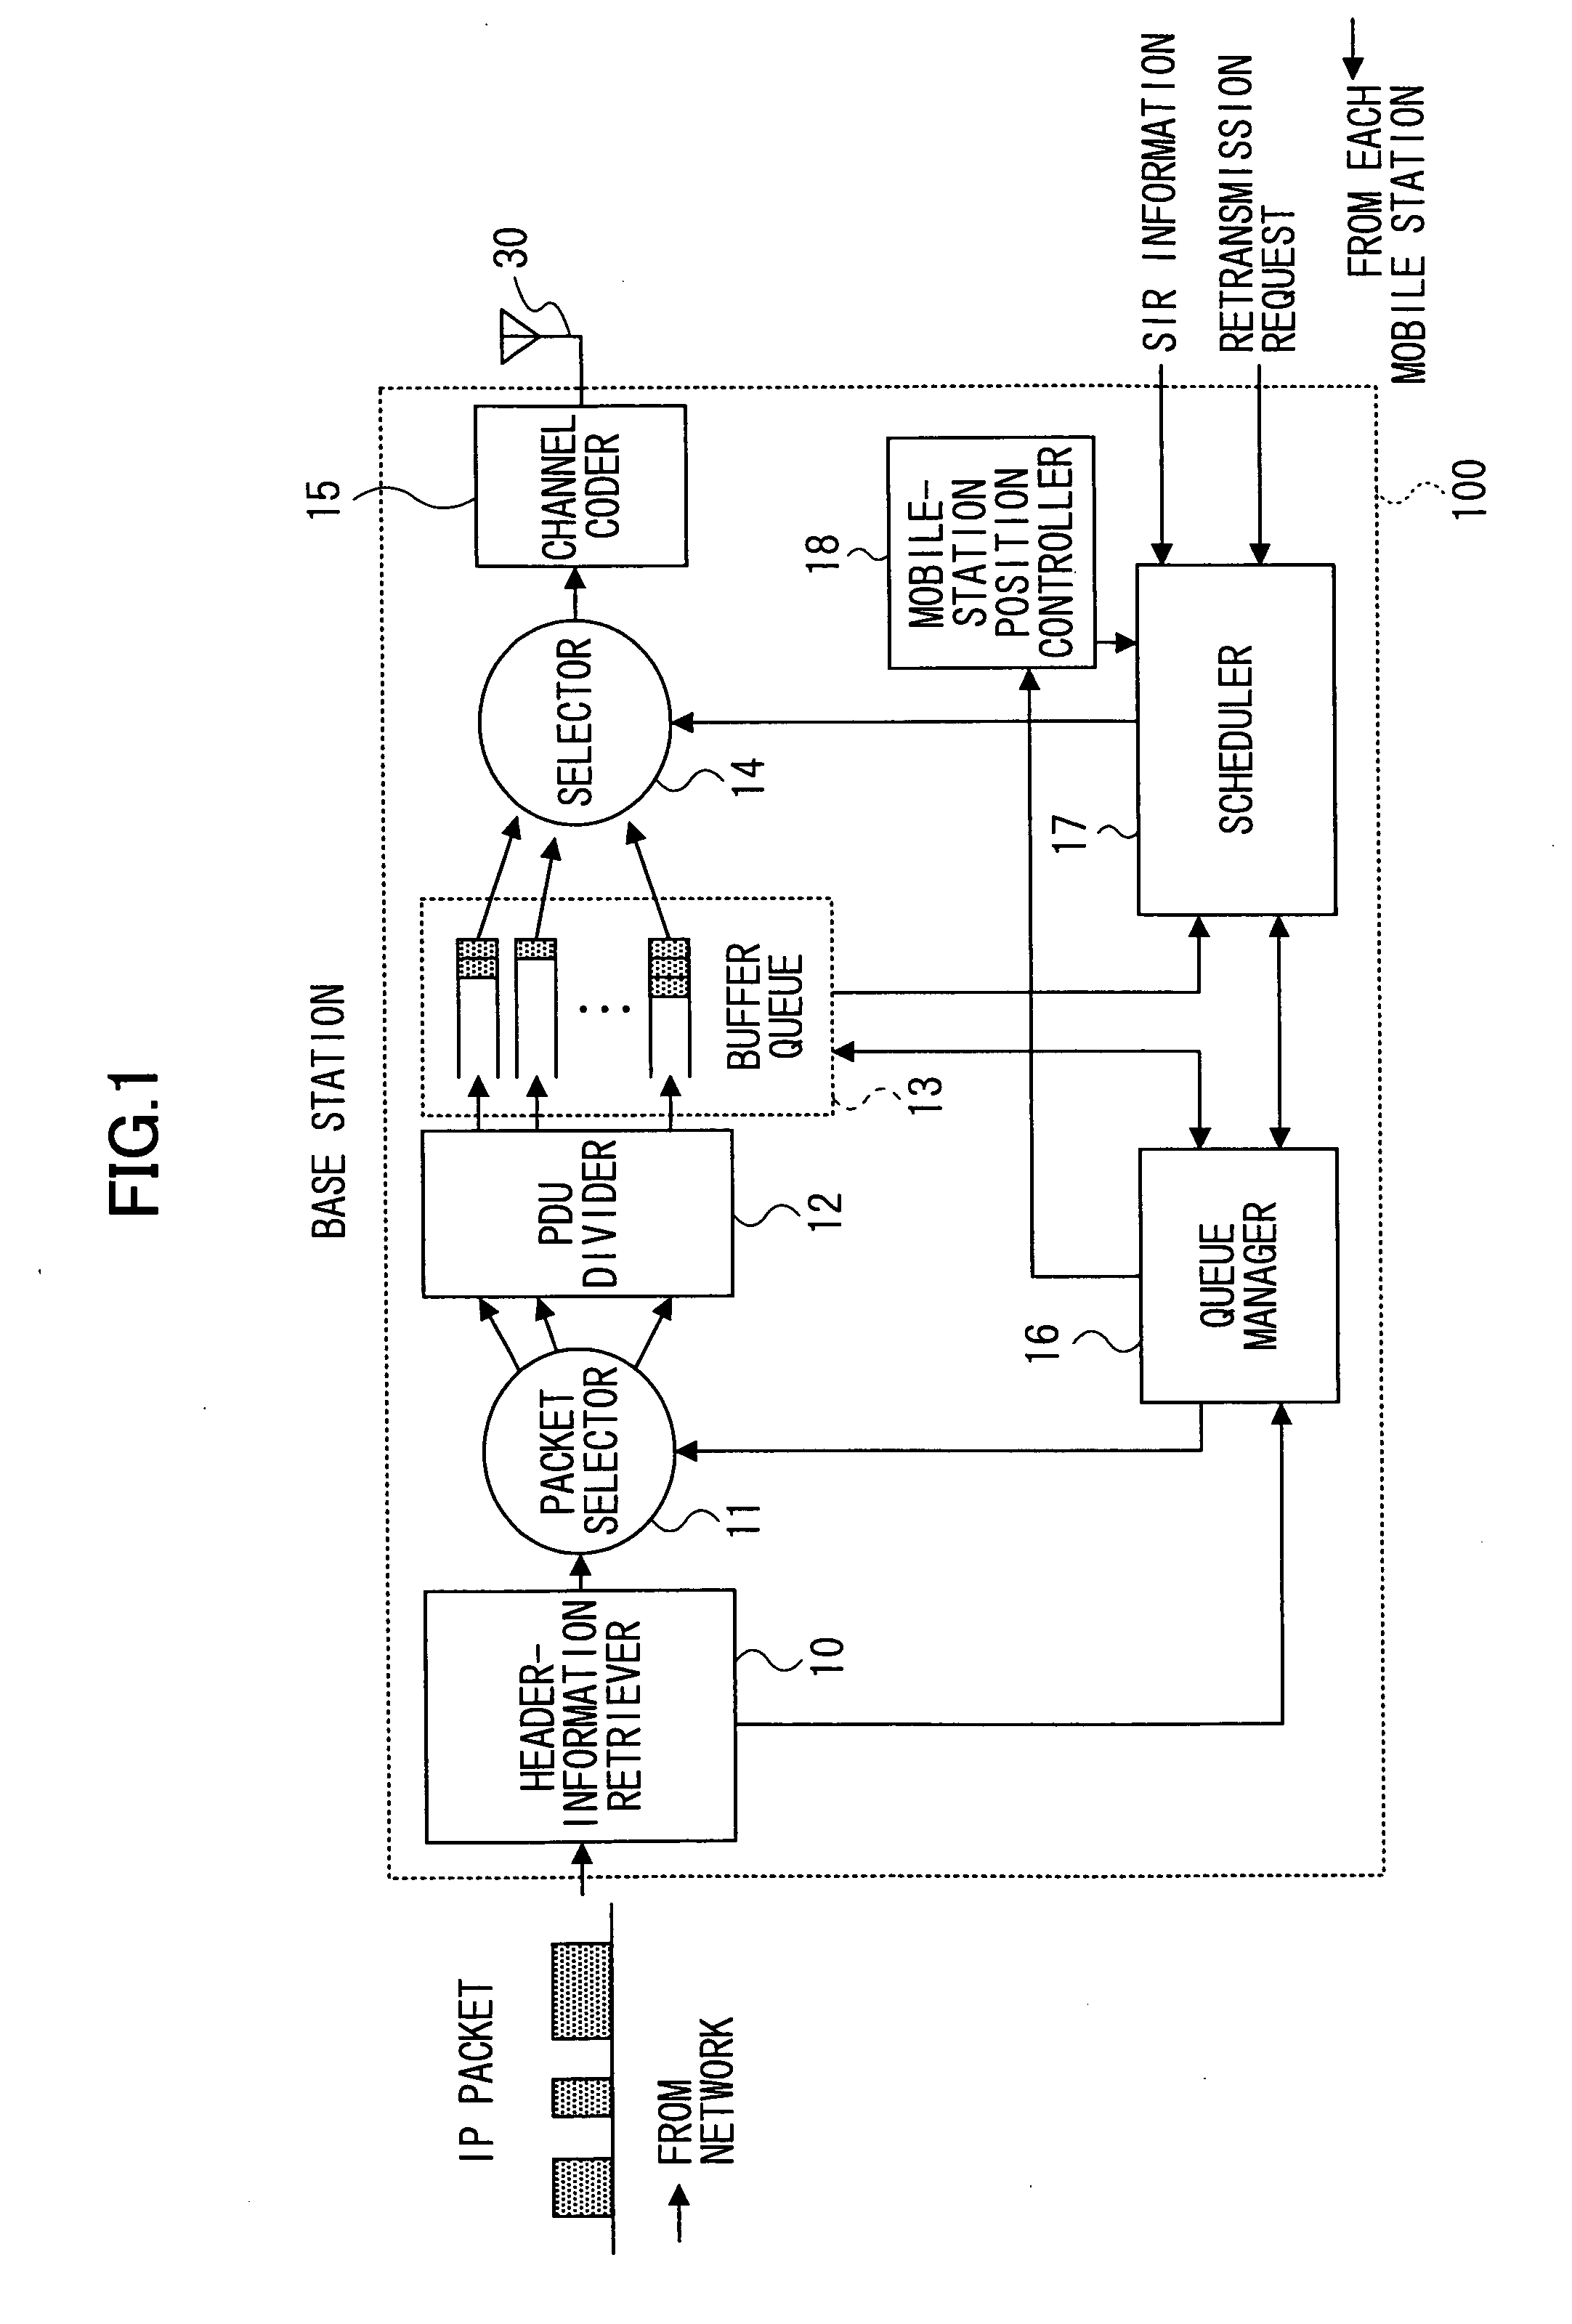 Packet-priority control apparatus and method thereof